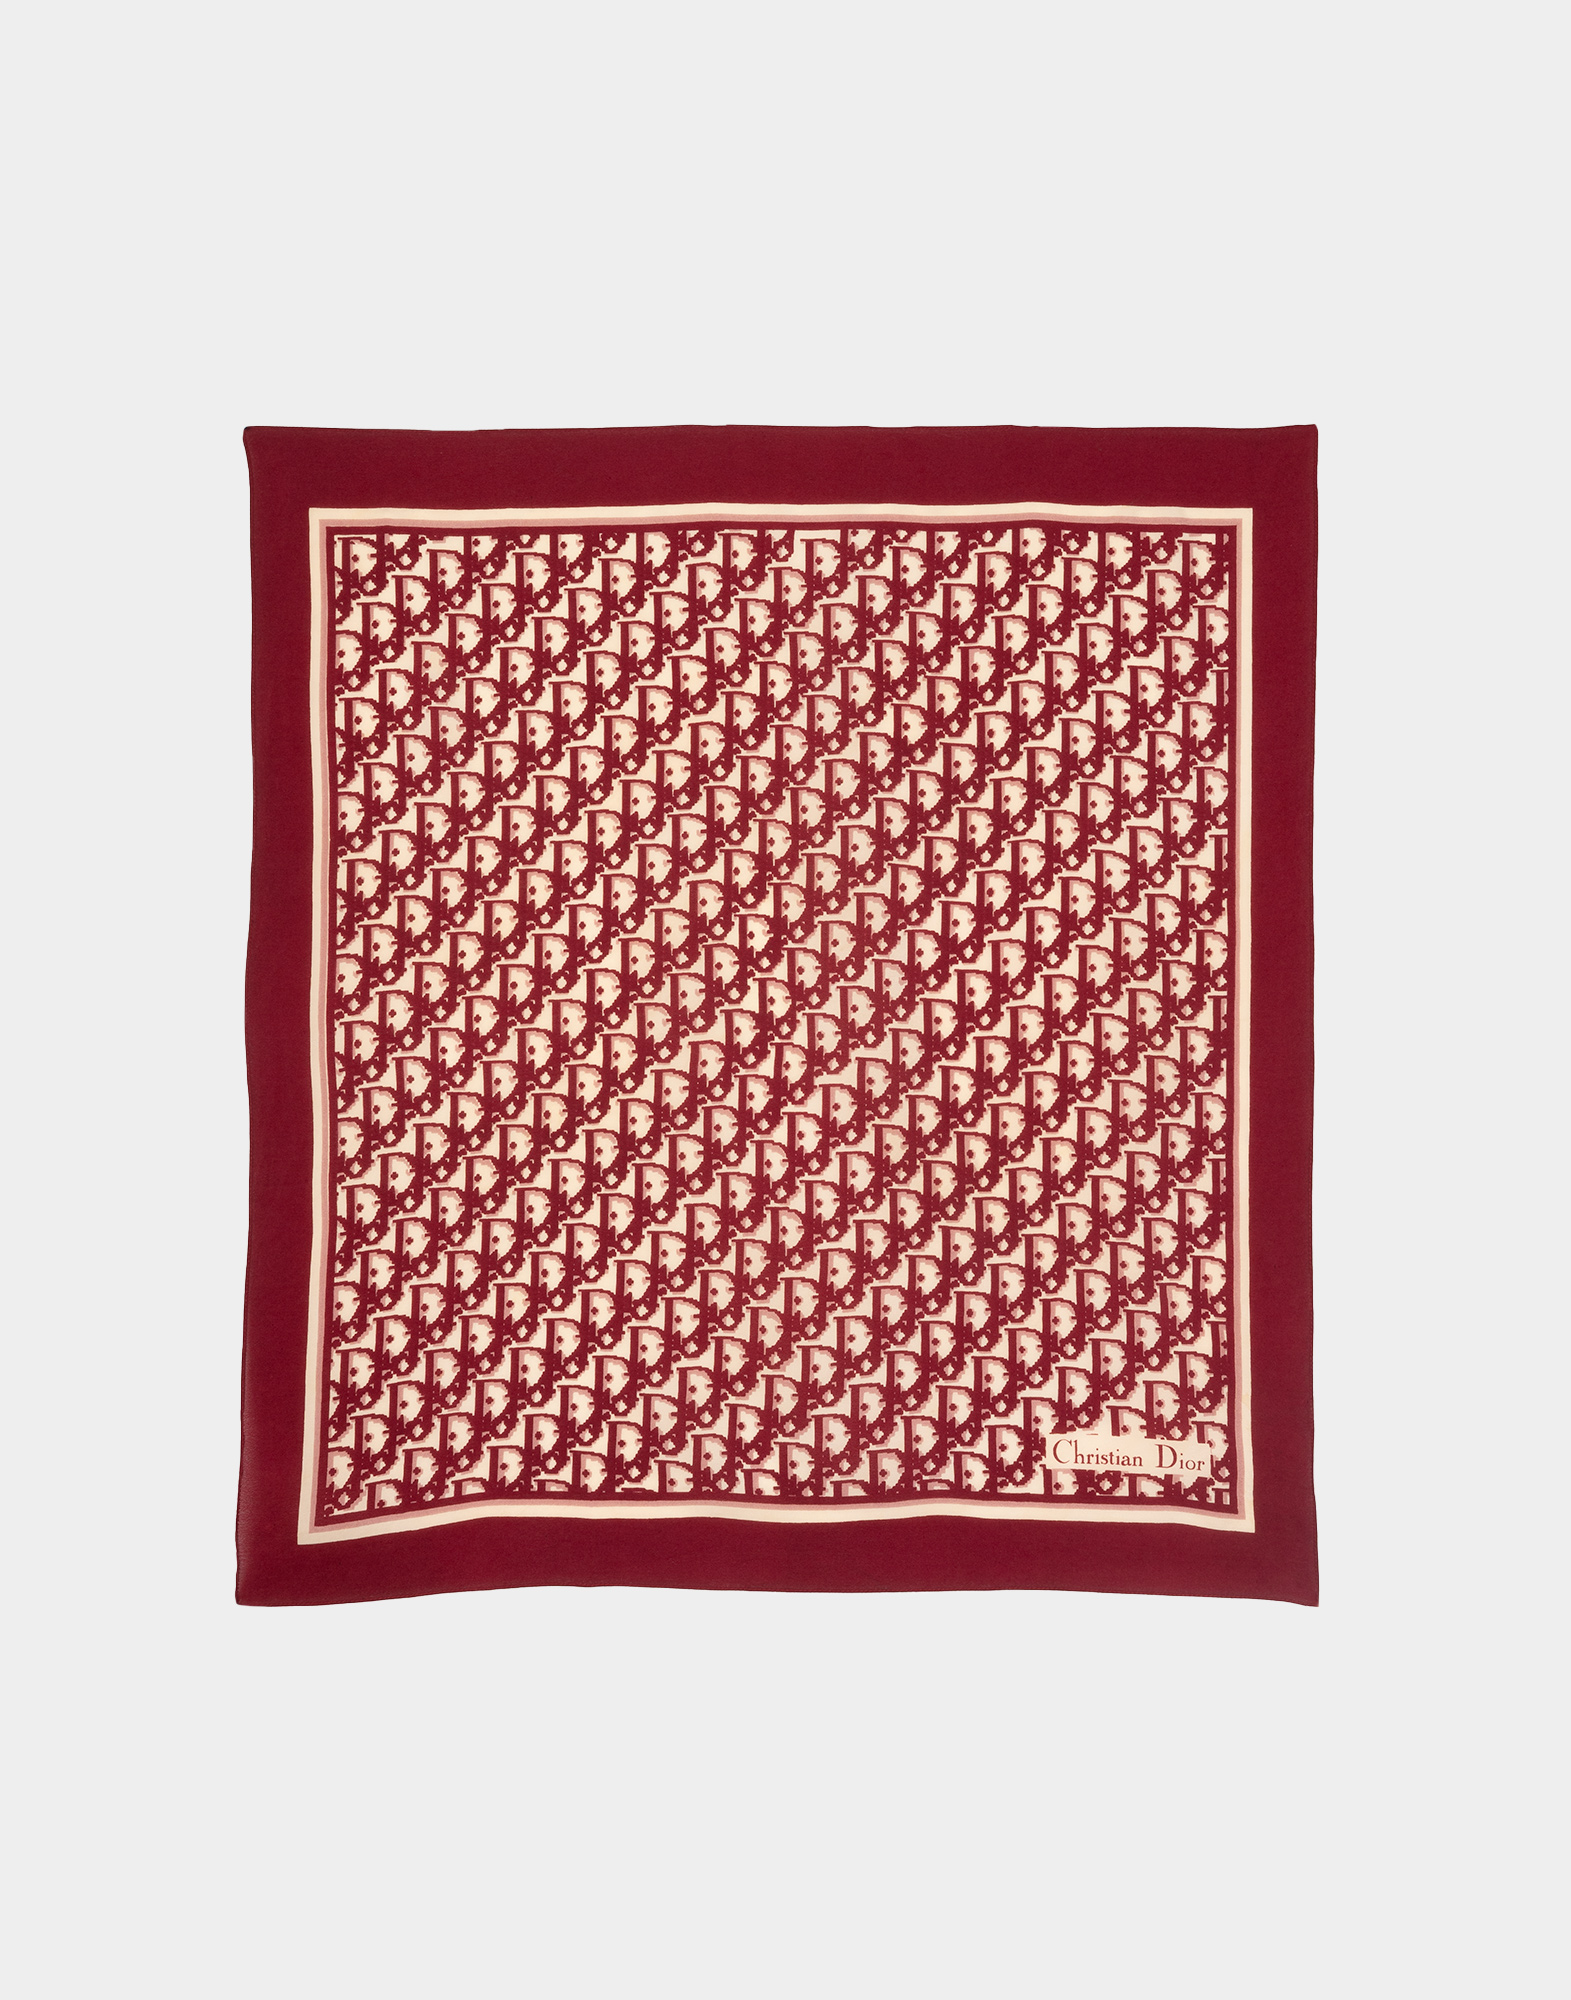 Red monogram scarf, photographed on a gray background.